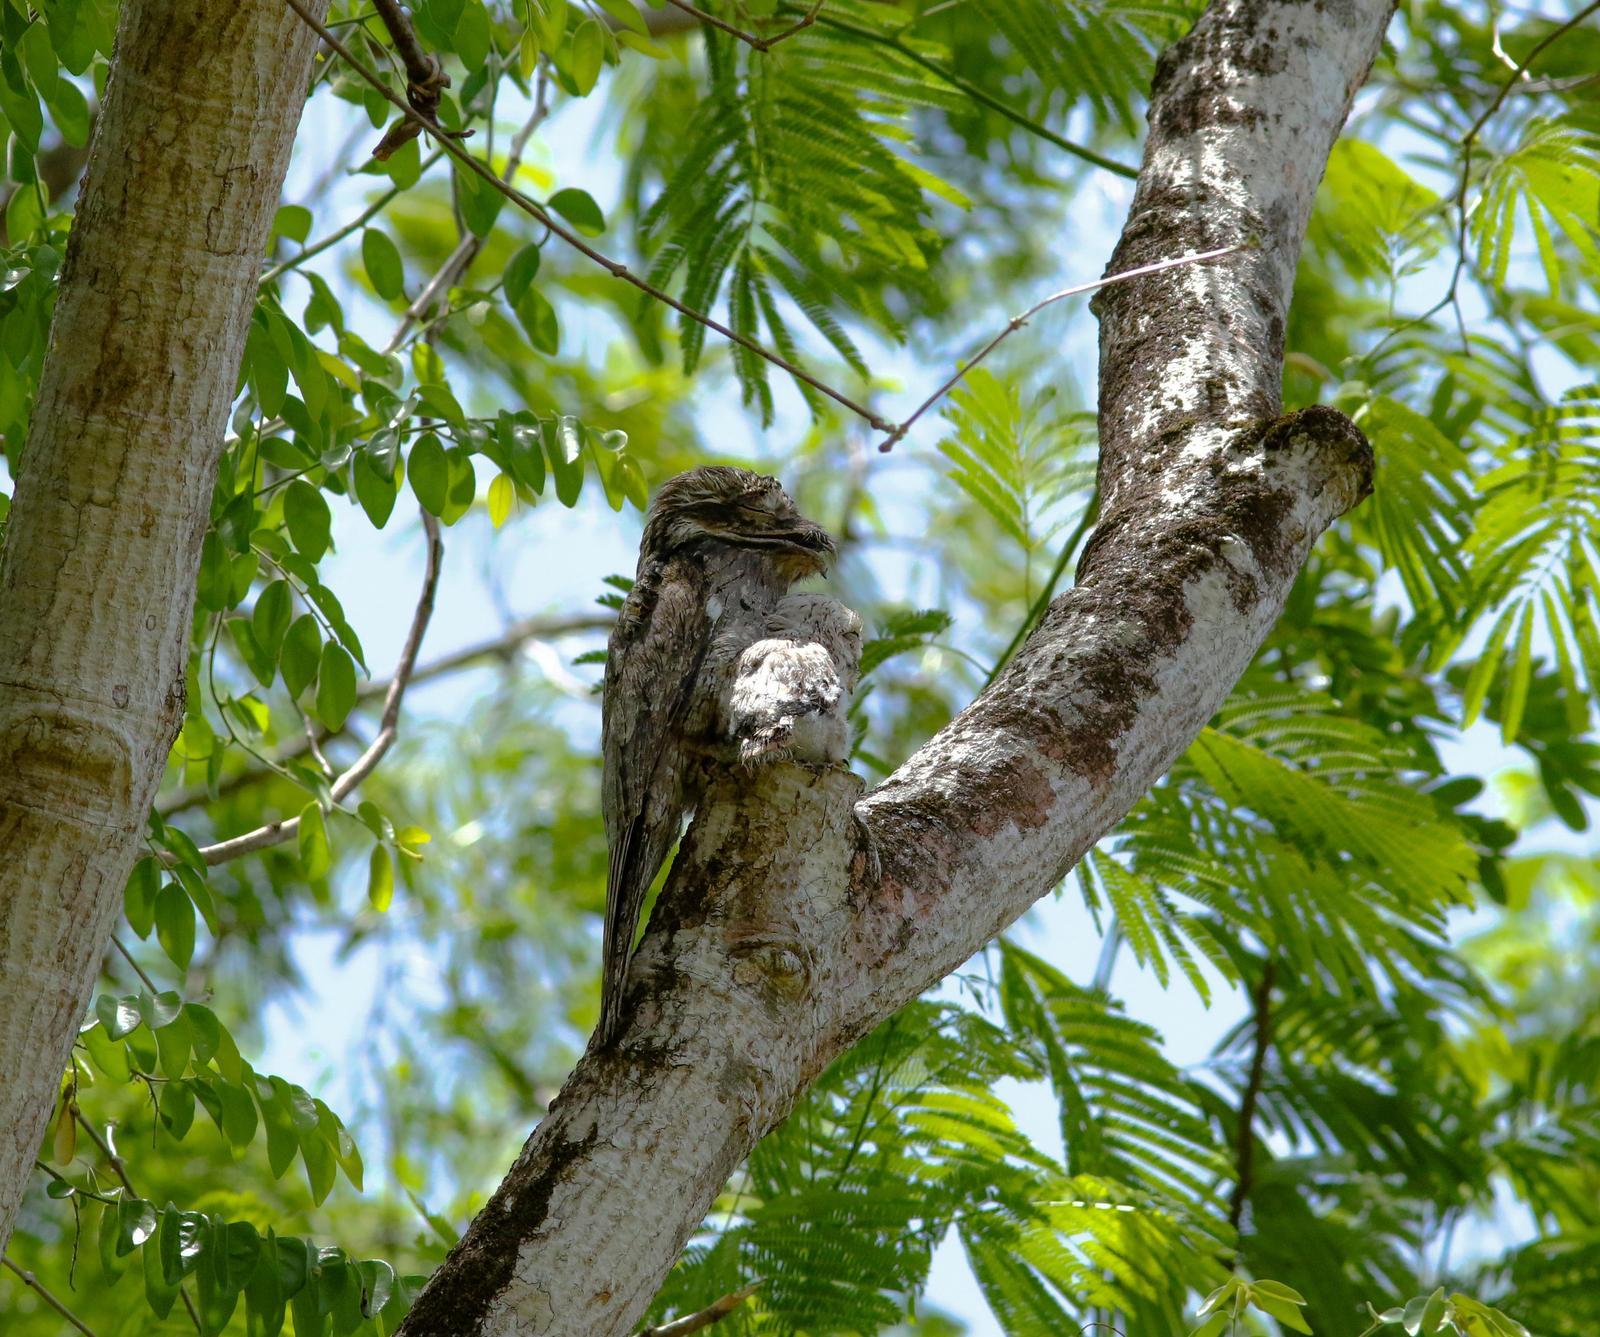 Northern Potoo (Middle American) Photo by Leonardo Garrigues